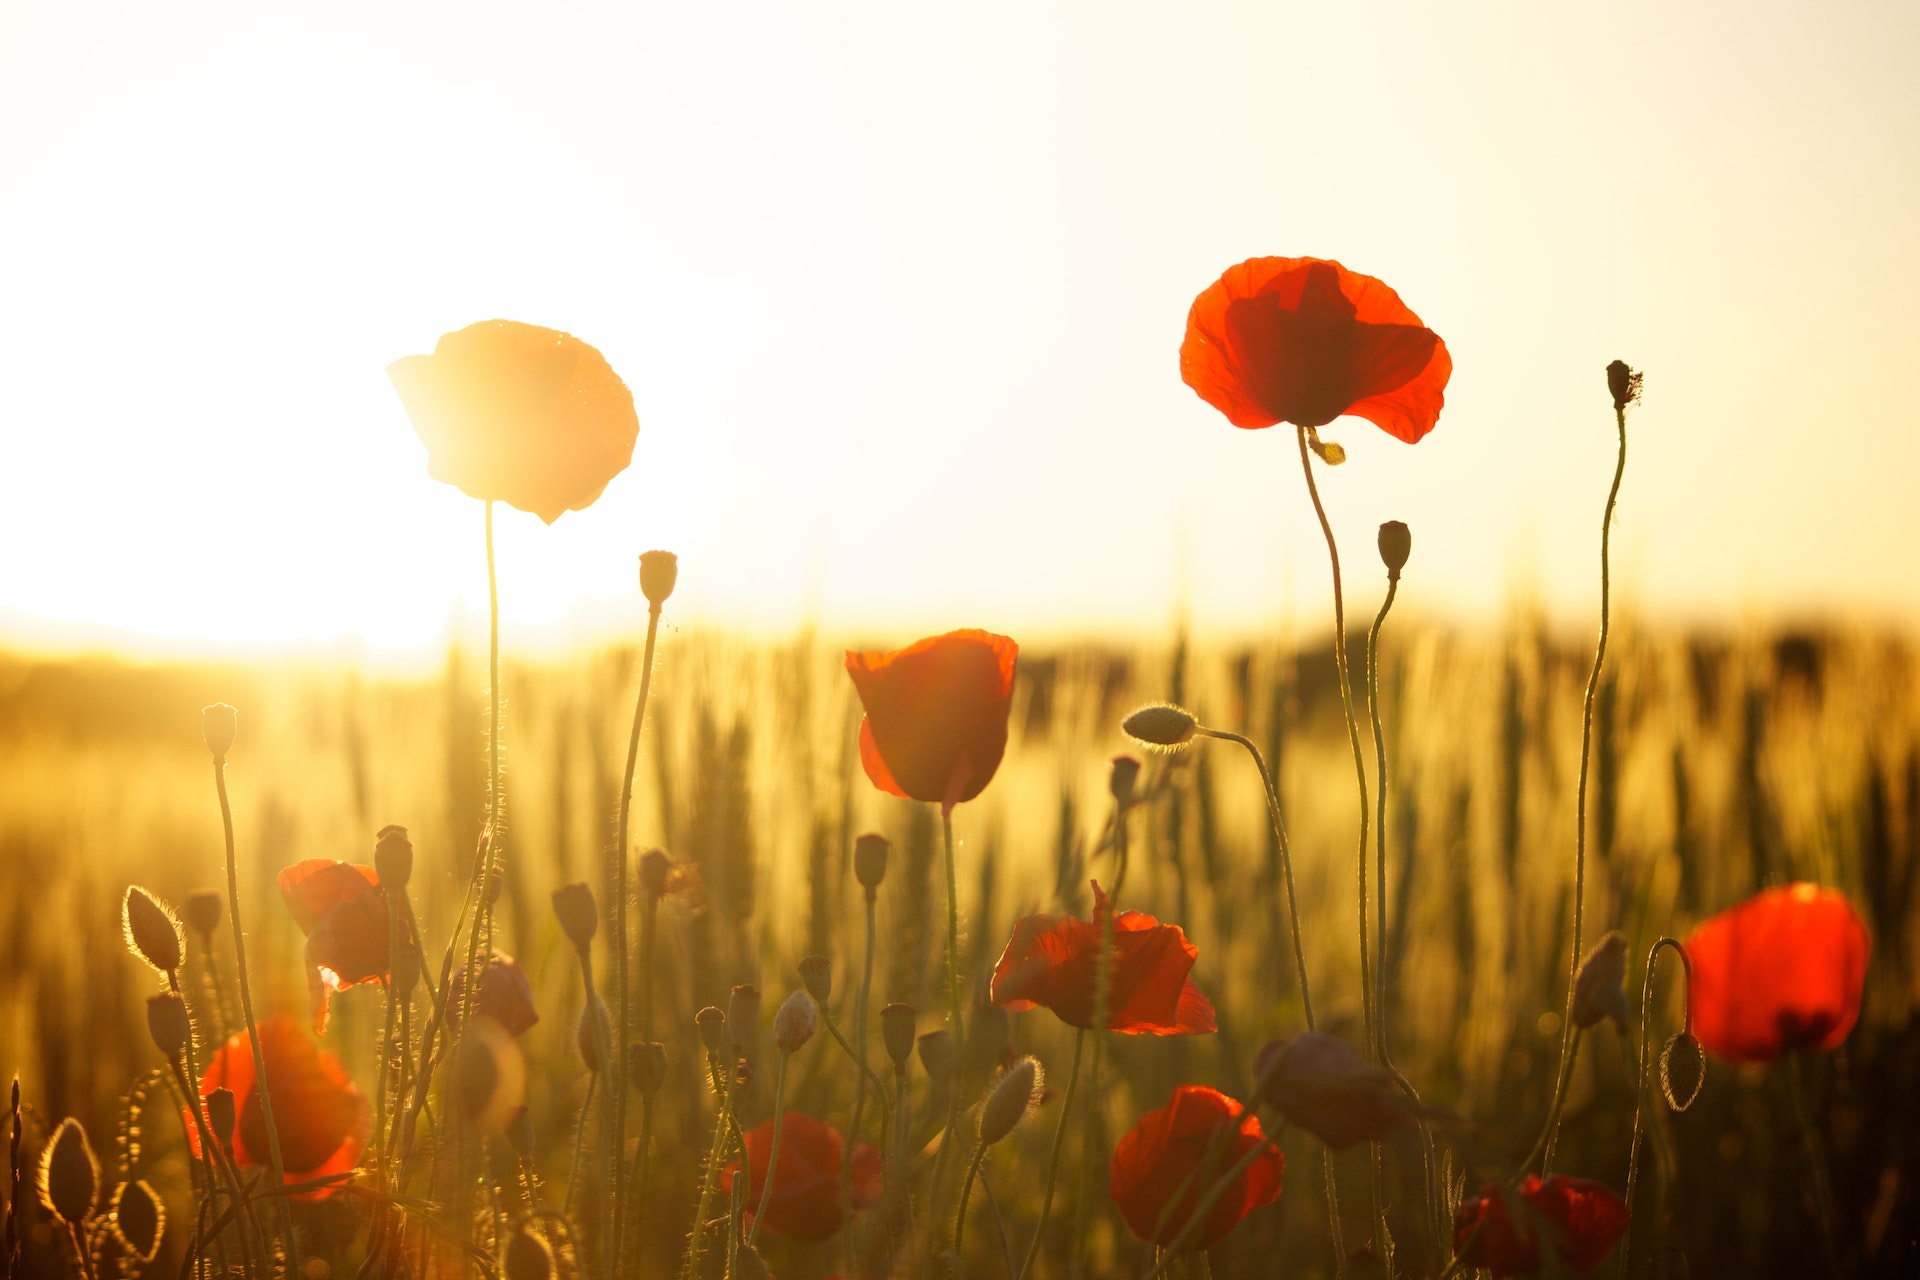 Mayor Frank Campion’s statement on  Remembrance Day 2022